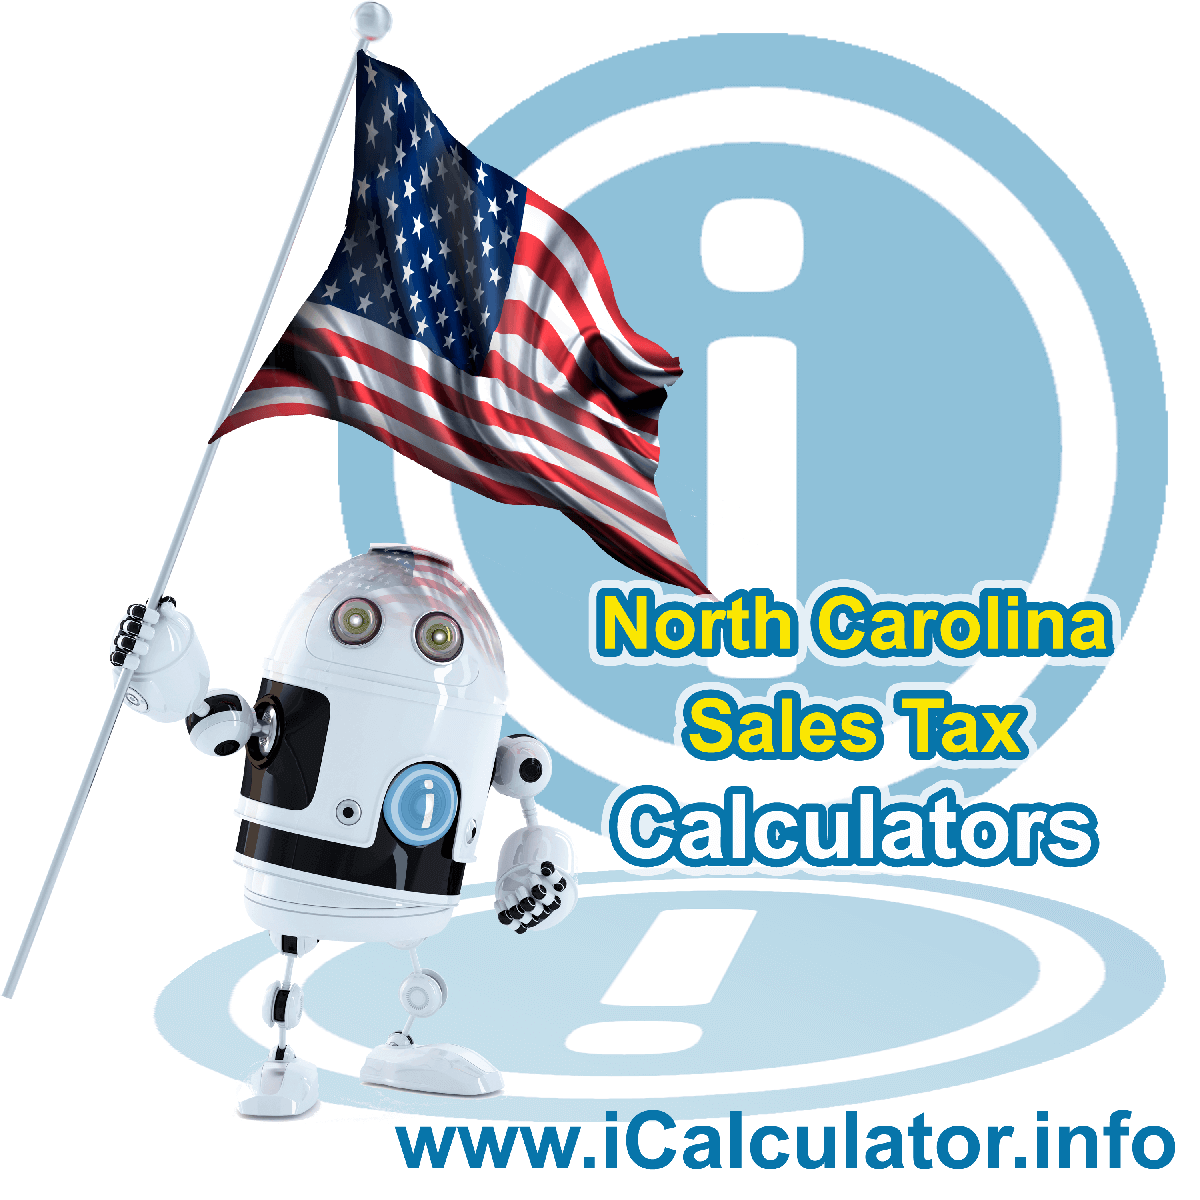 Rutherford County Sales Rates: This image illustrates a calculator robot calculating Rutherford County sales tax manually using the Rutherford County Sales Tax Formula. You can use this information to calculate Rutherford County Sales Tax manually or use the Rutherford County Sales Tax Calculator to calculate sales tax online.